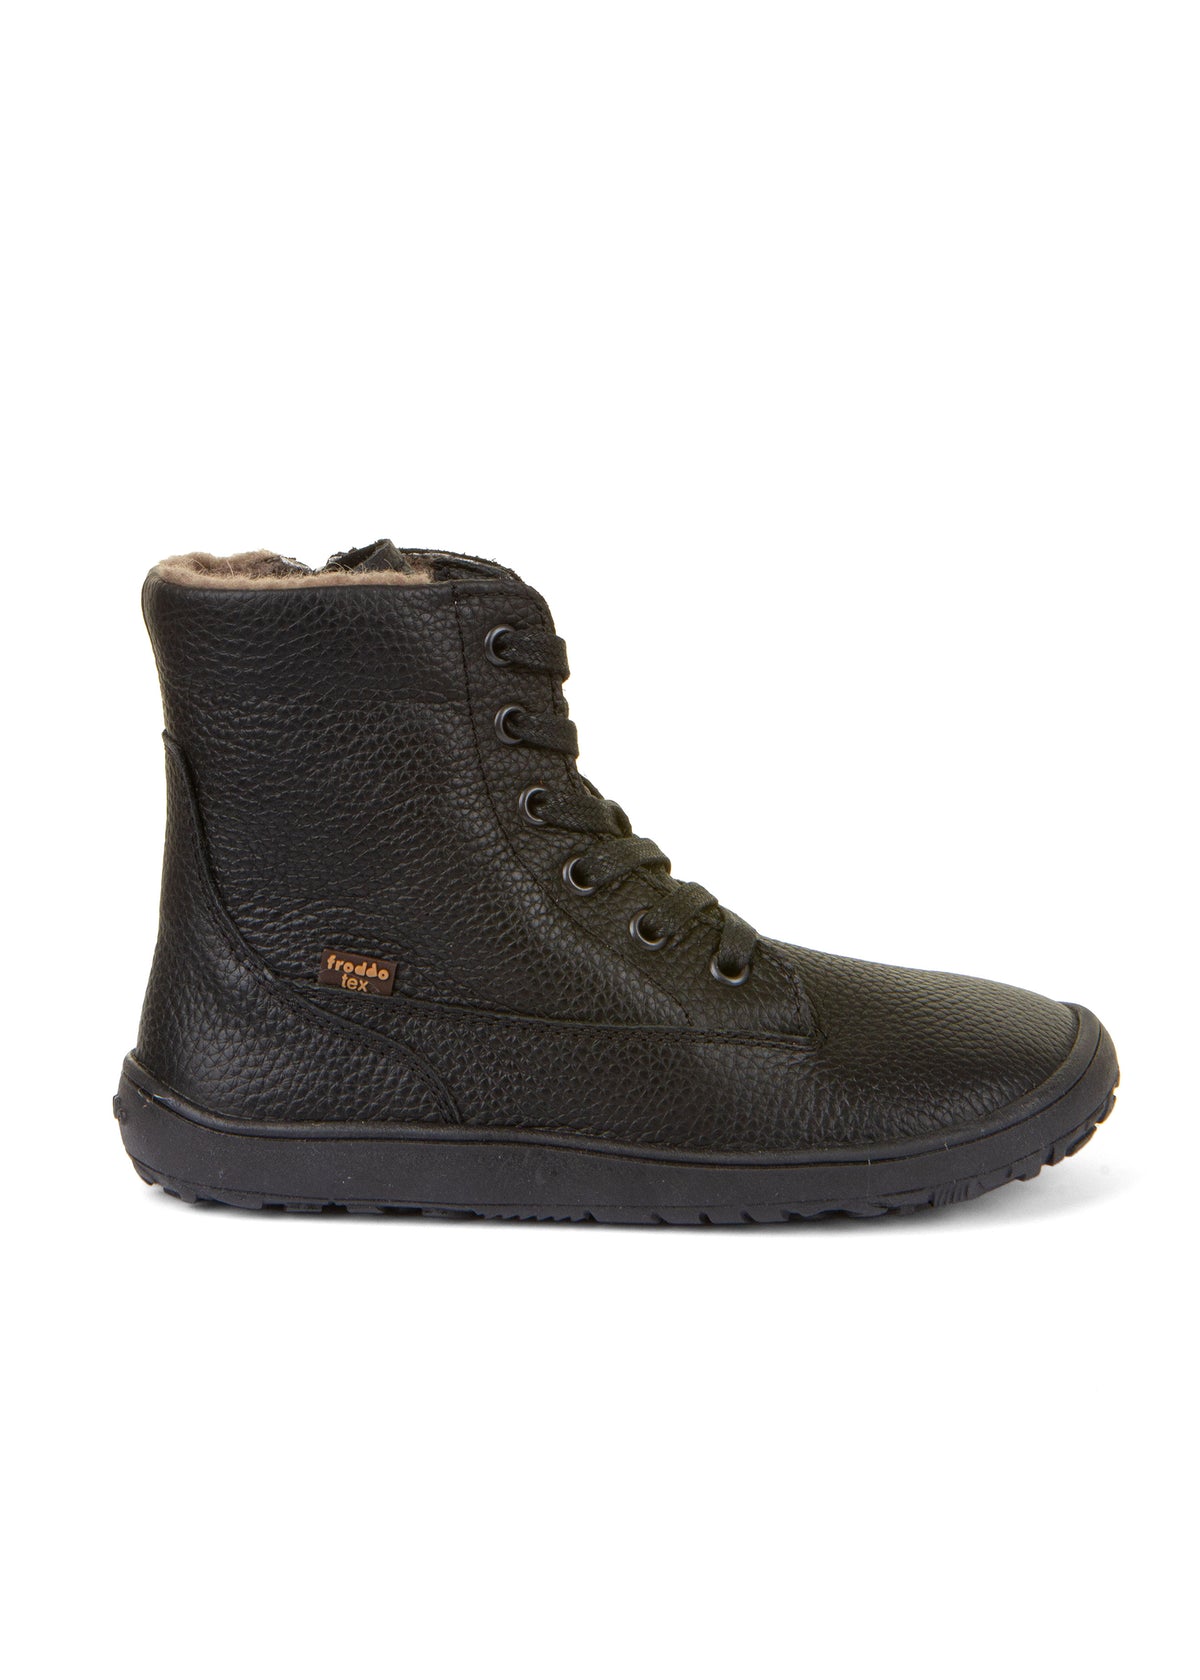 Barefoot shoes - leather winter shoes, TEX Laces - black